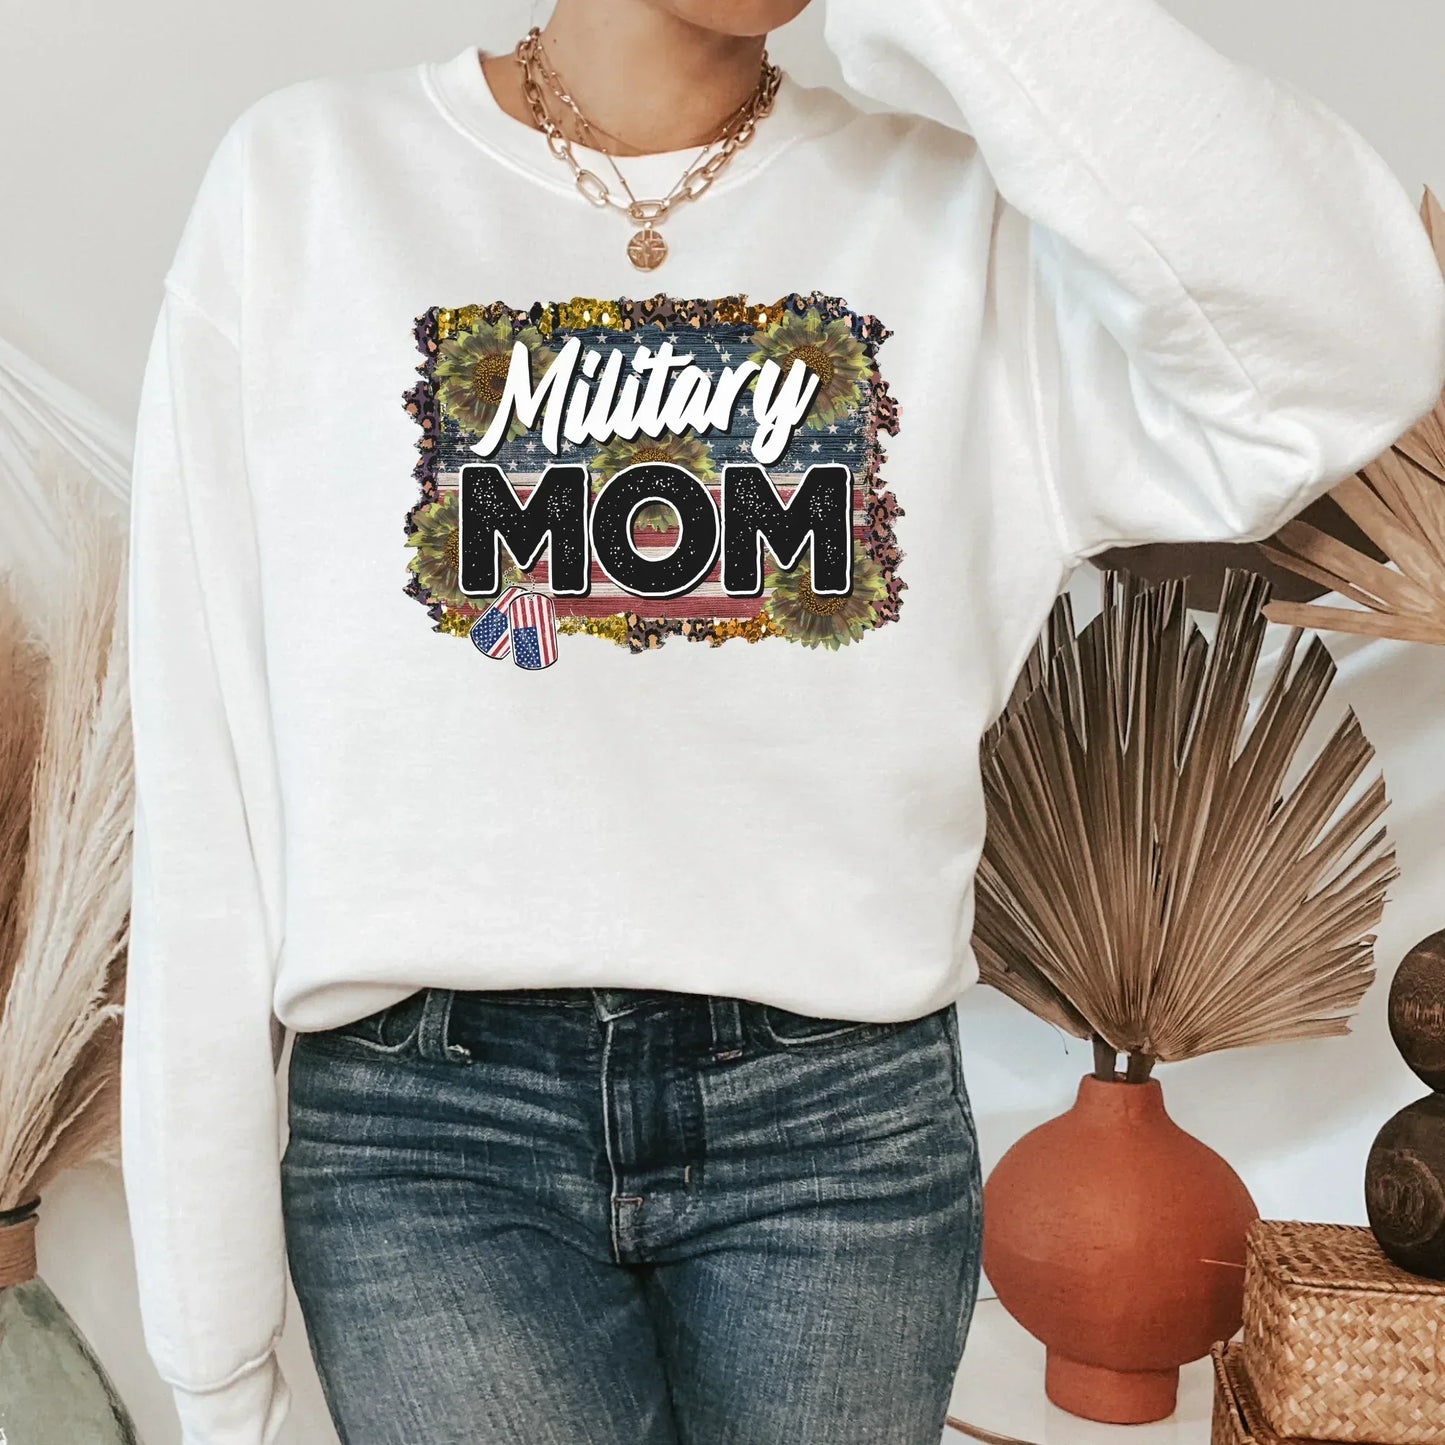 Military Mom Shirt, Proud Army Mom, Military Wife Sweatshirt, Army Mom Gift, Air Force Mom, Support our troops, Marine Coast guard, Navy Mom HMDesignStudioUS